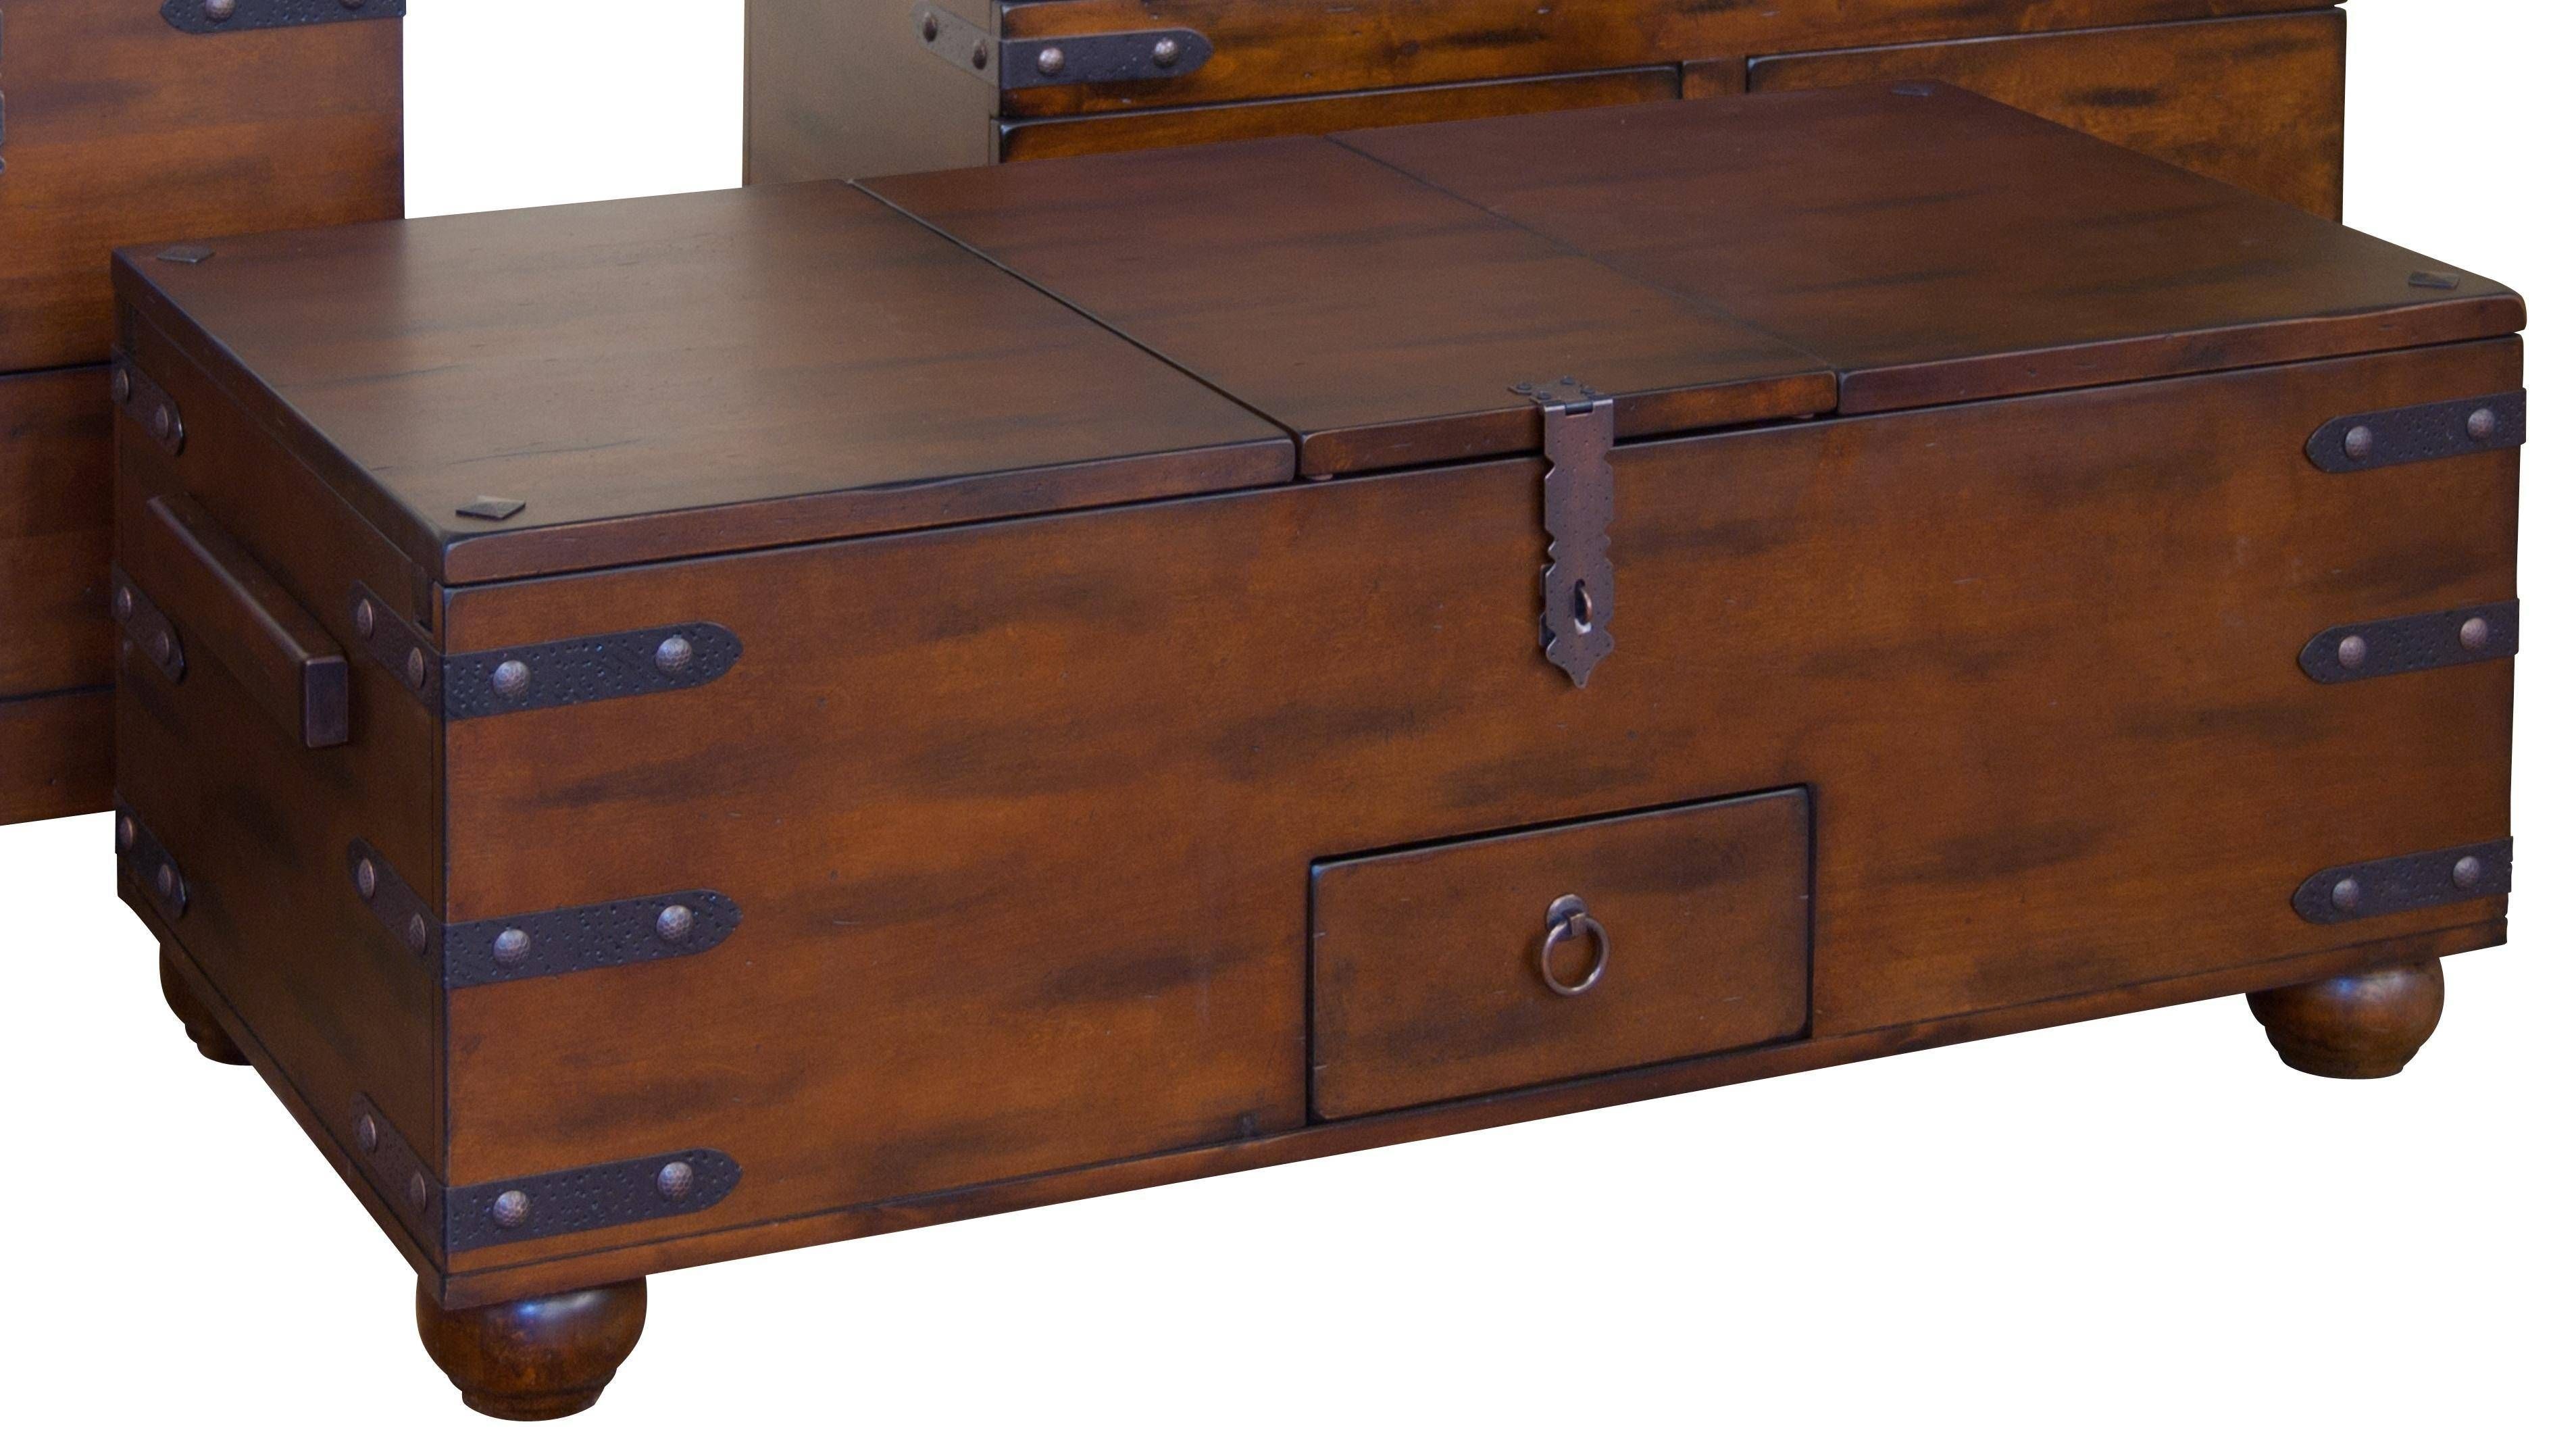 Coffee Table: Beautiful Storage Trunk Coffee Table Designs Trunk Throughout Dark Wood Coffee Table Storages (View 11 of 30)